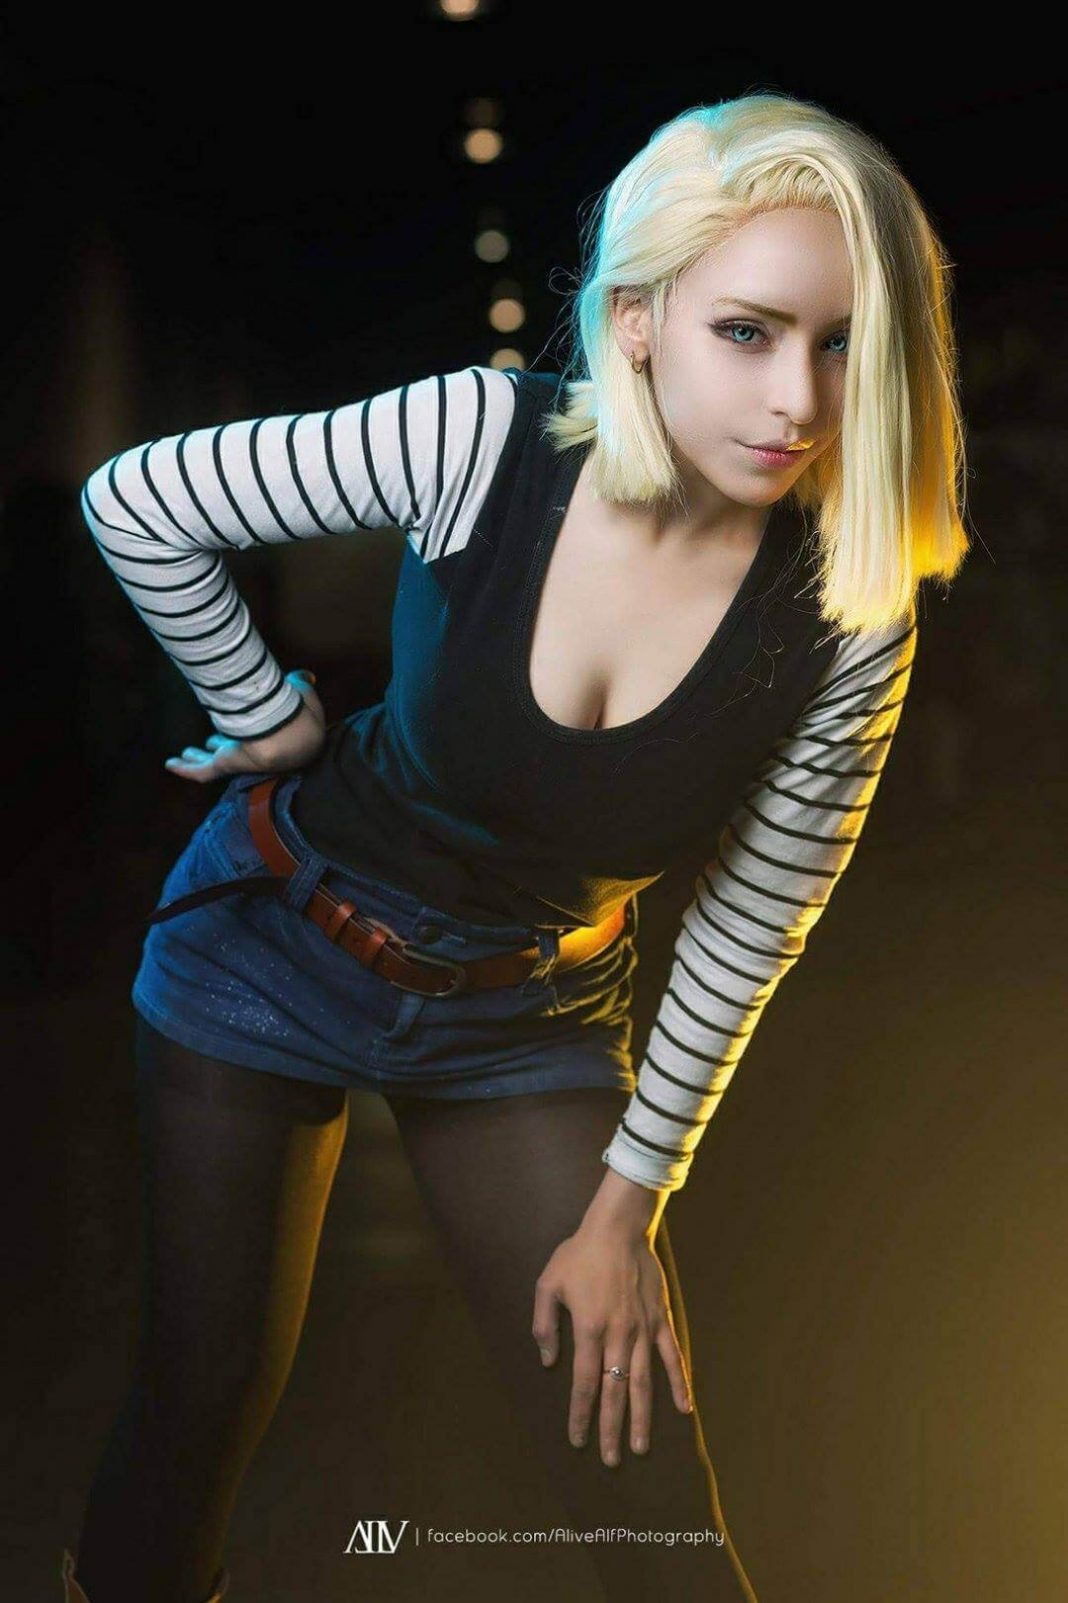 49 Android 18 Nude Pictures Which Prove Beauty Beyond Recognition 110